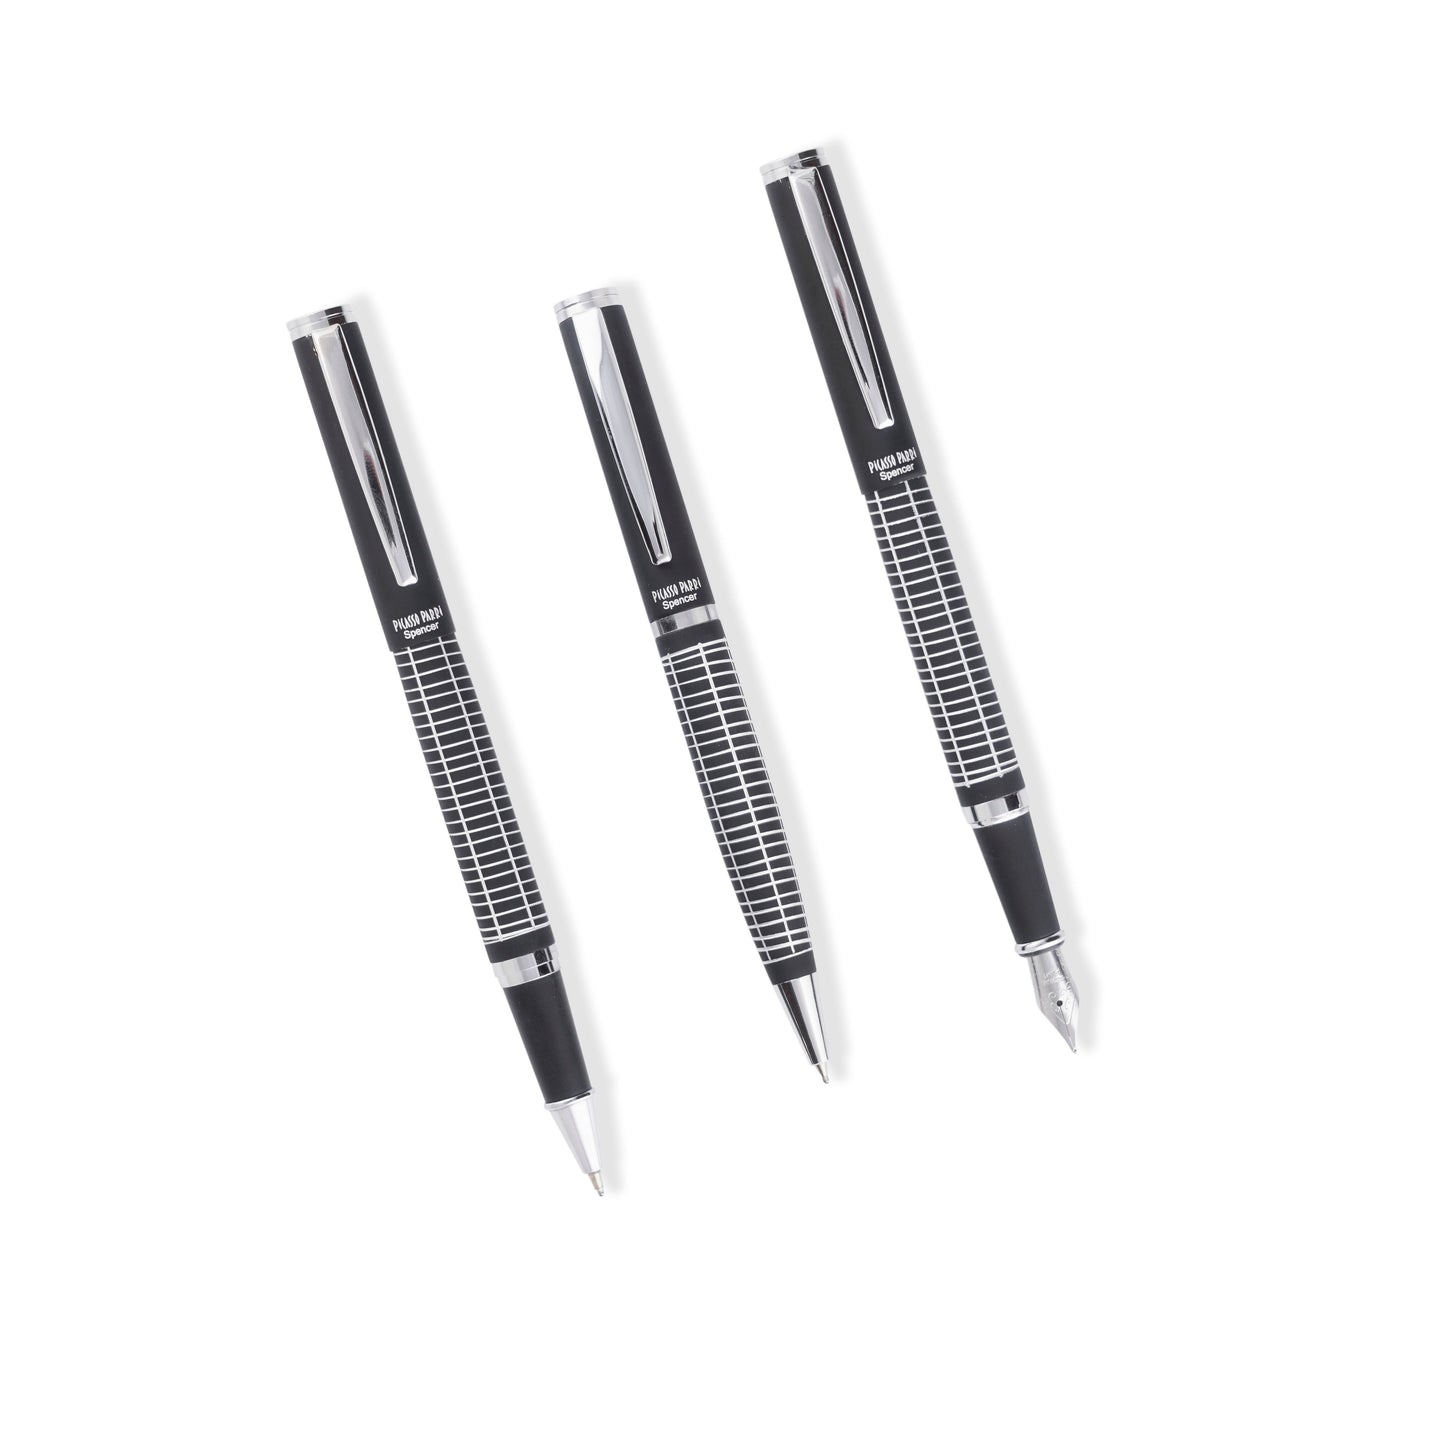 Picasso Parri Spencer 3 In 1 Ball Pen, Roller Pen And Fountain Pen Set